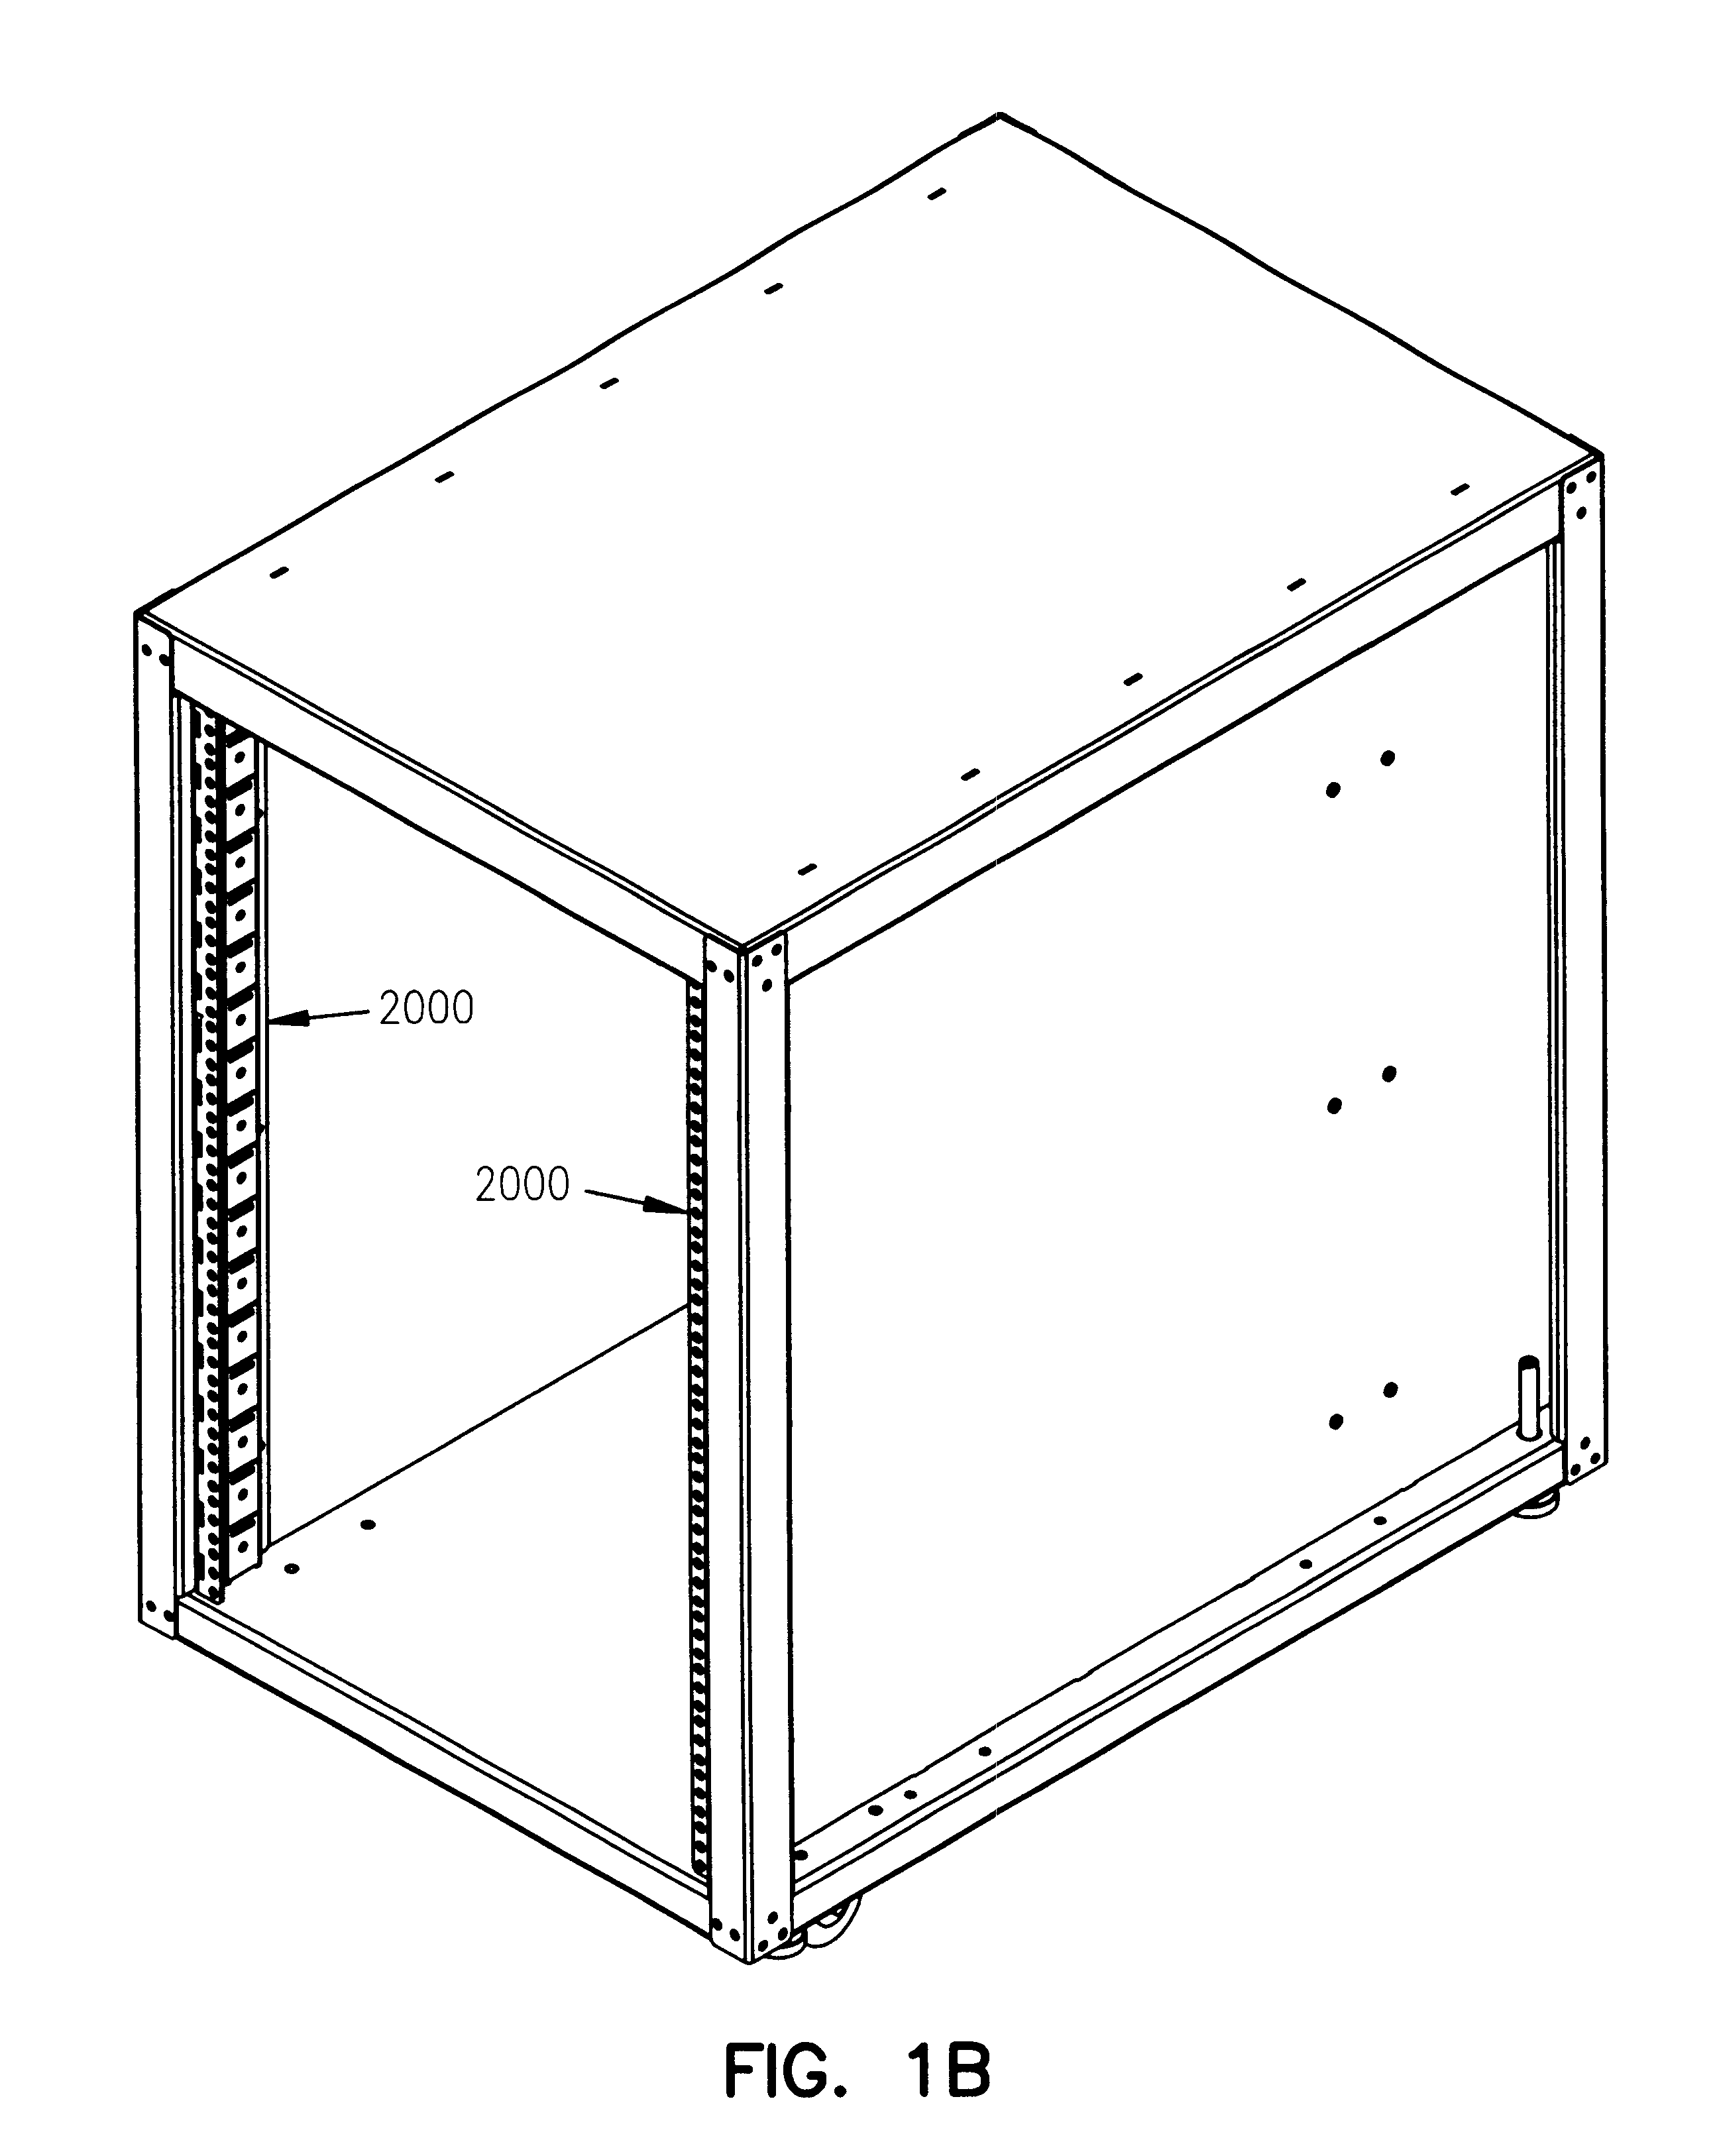 Computer module mounting system and method